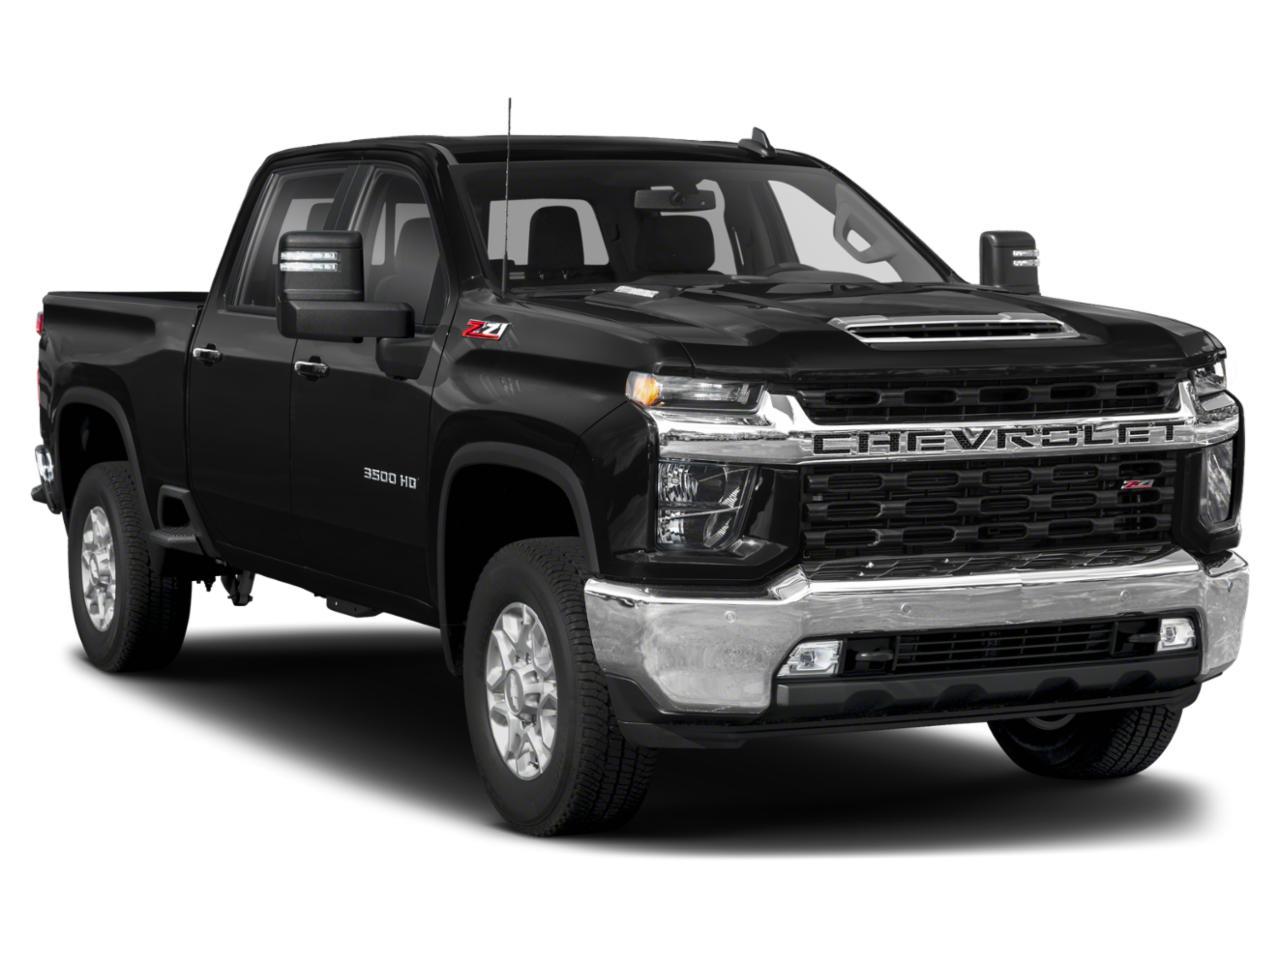 2023-chevrolet-silverado-3500-hd-chassis-incentives-specials-offers